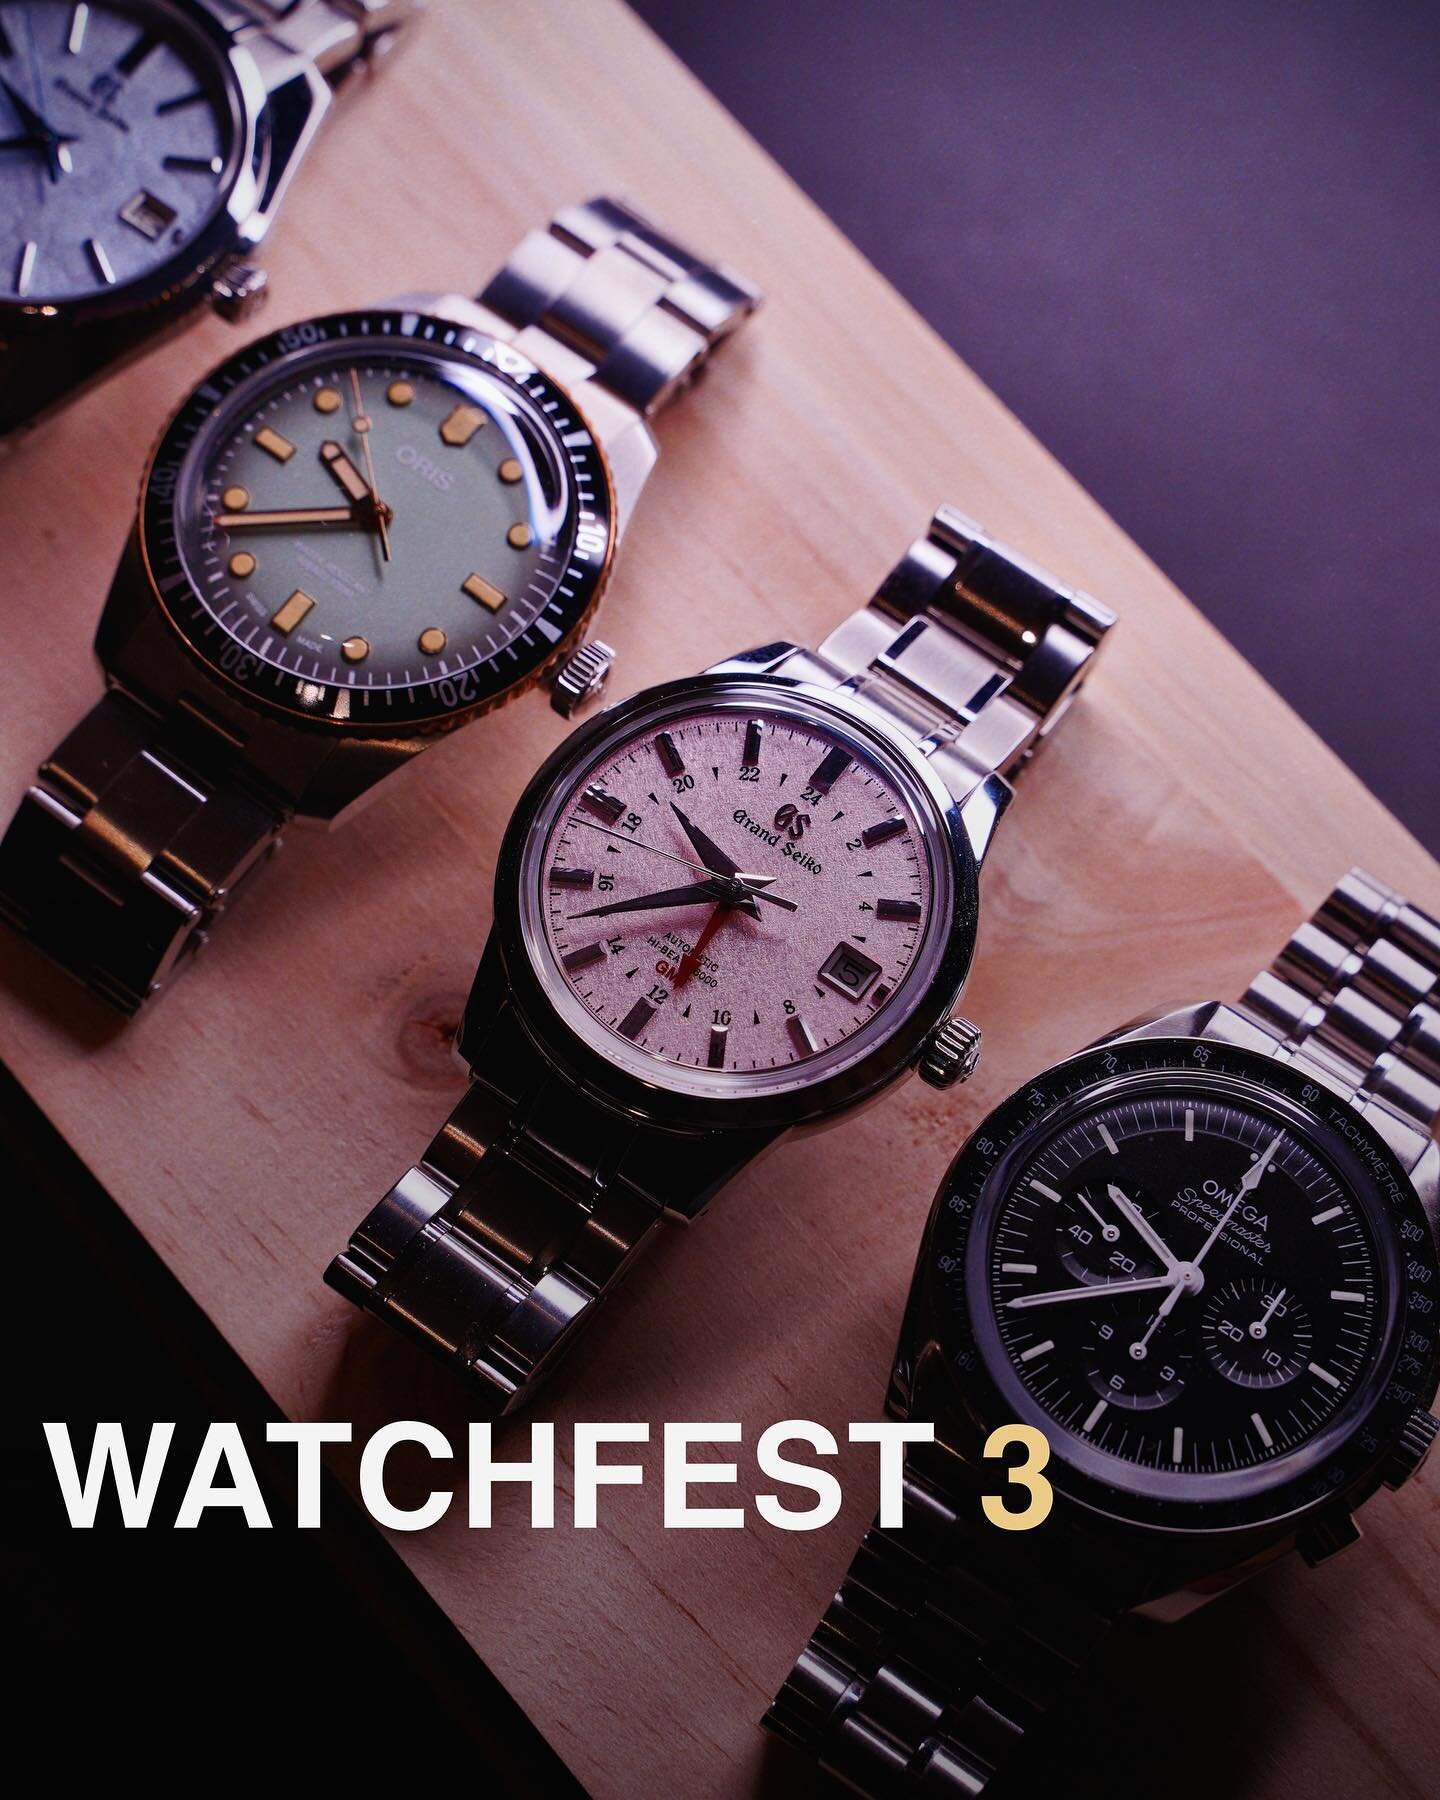 Experience a day full of watches and horology. Meet fellow enthusiasts; discover timepieces and see what your favourite brands have in store! 

Watchfest is Australia&rsquo;s largest and growing watch enthusiast community. This year we have a wonderf